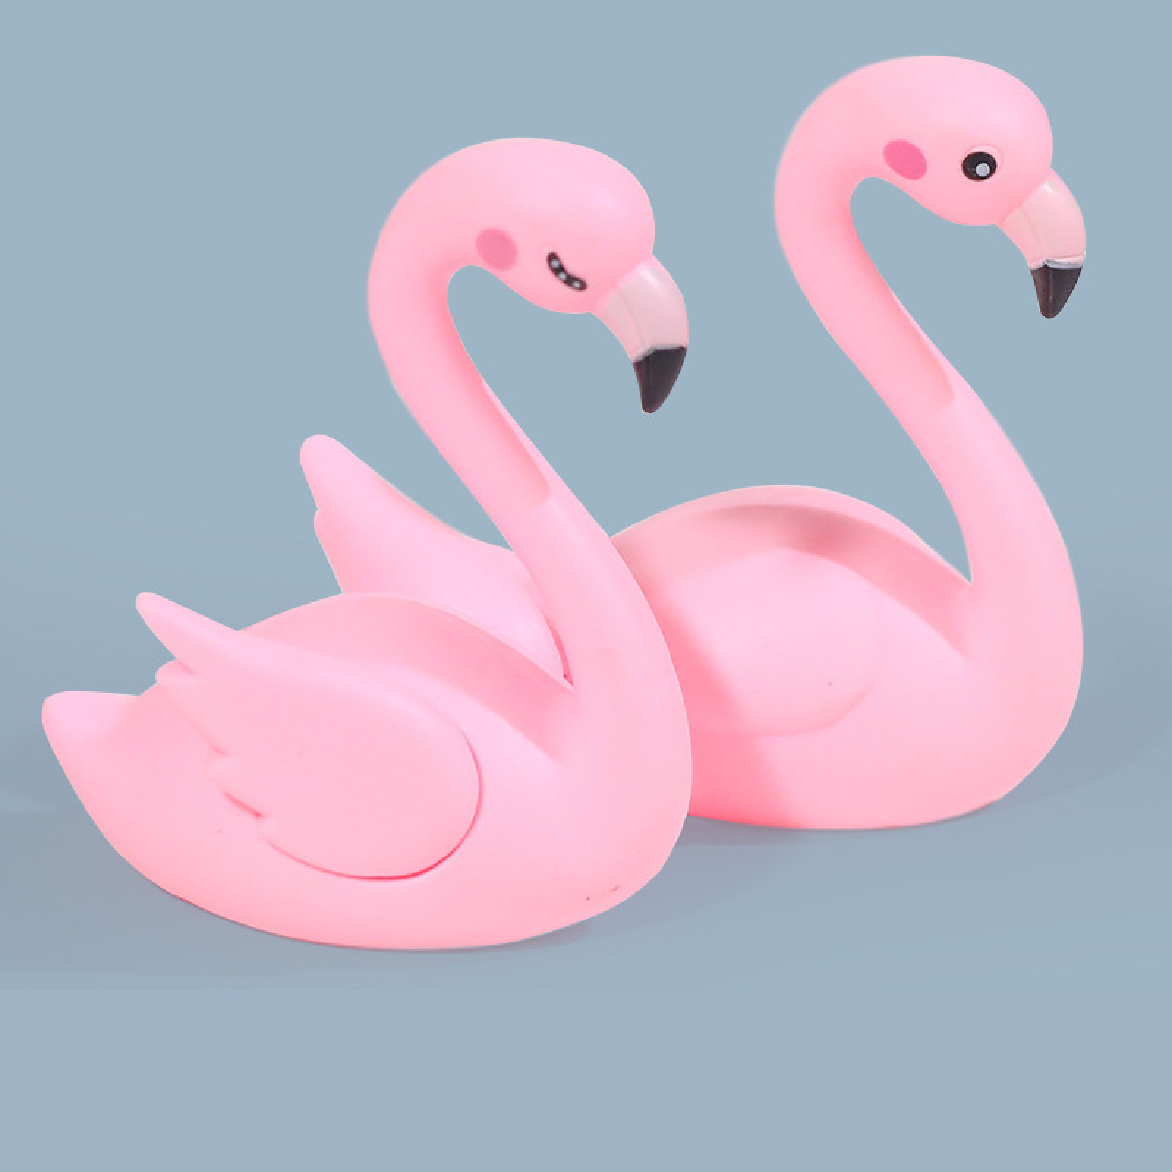 Cake Topper, Cake Decoration - Pink Flamingo - Type A